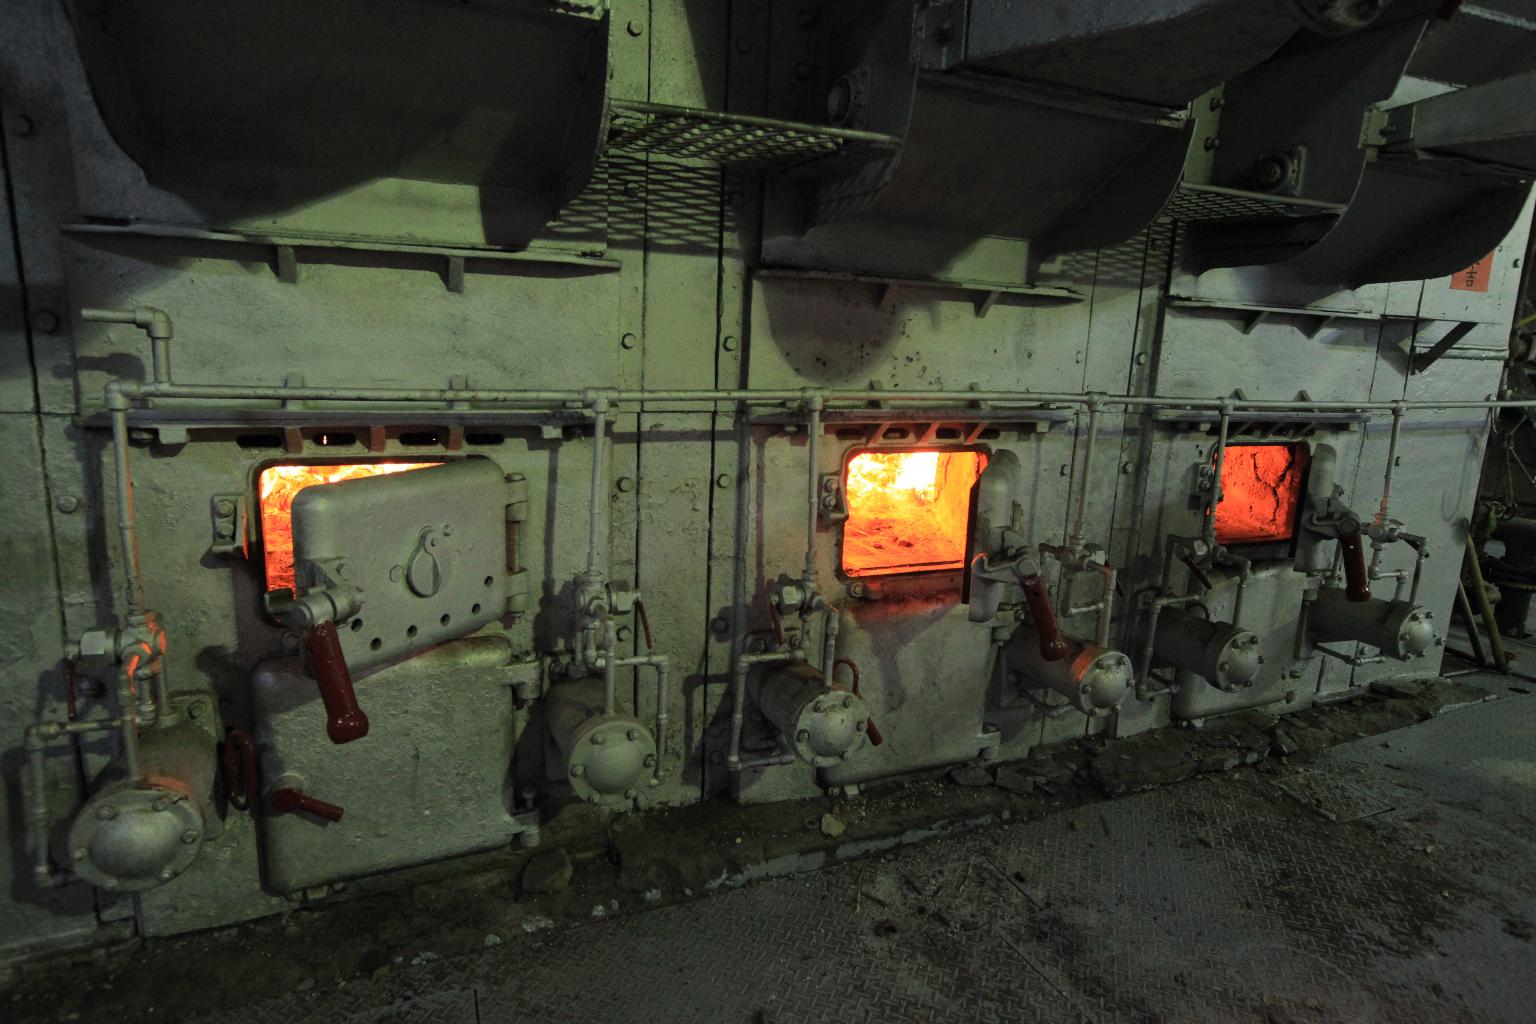 Most of the bagasse is burned as fuel for combined heat and power (CHP).